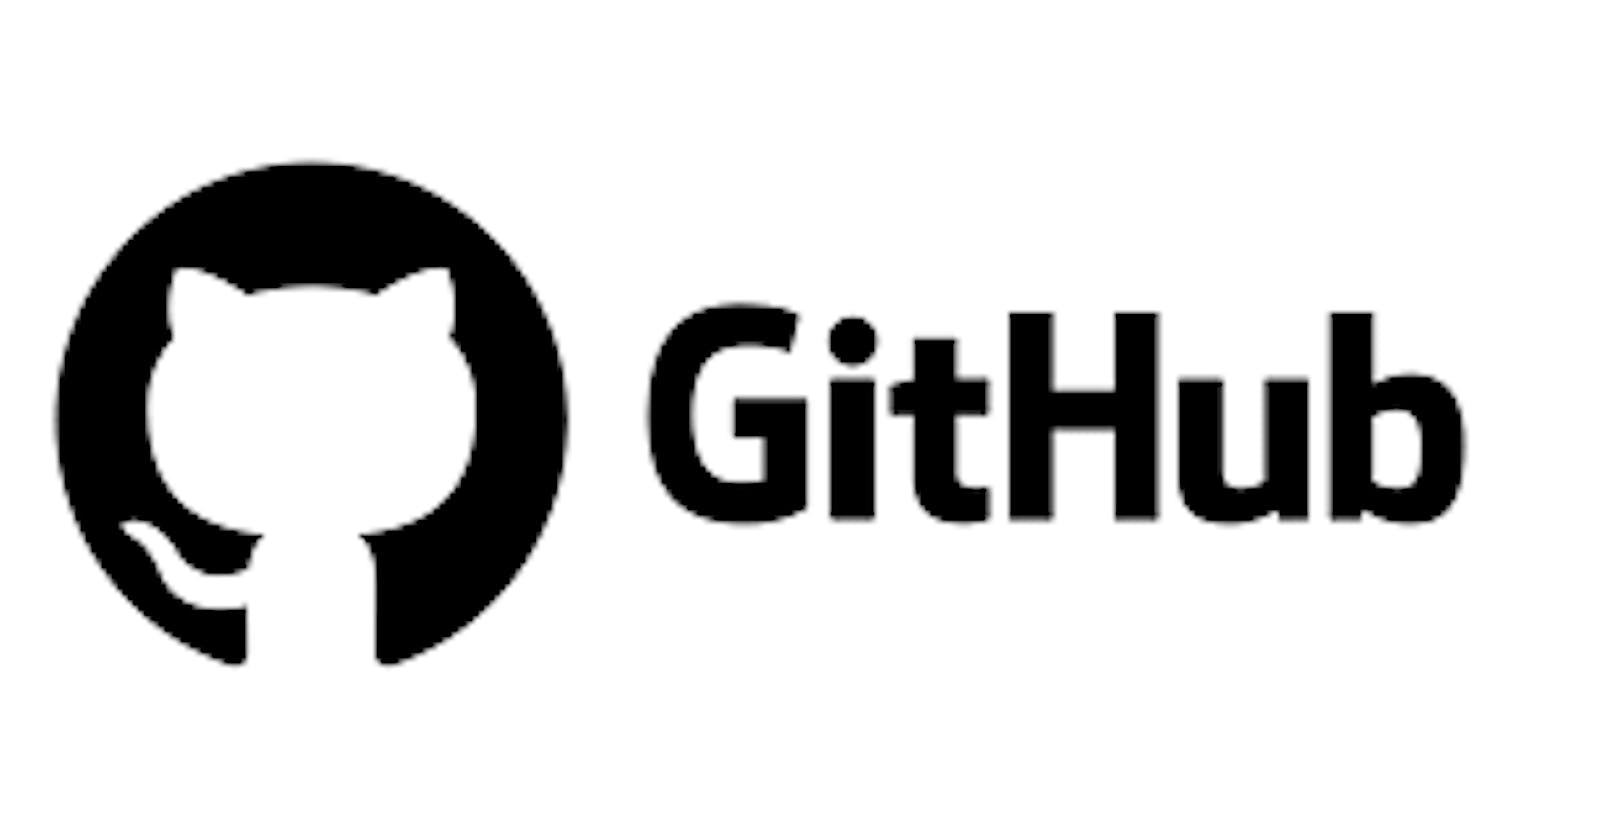 Steps to set up a Git repository and make an initial commit: